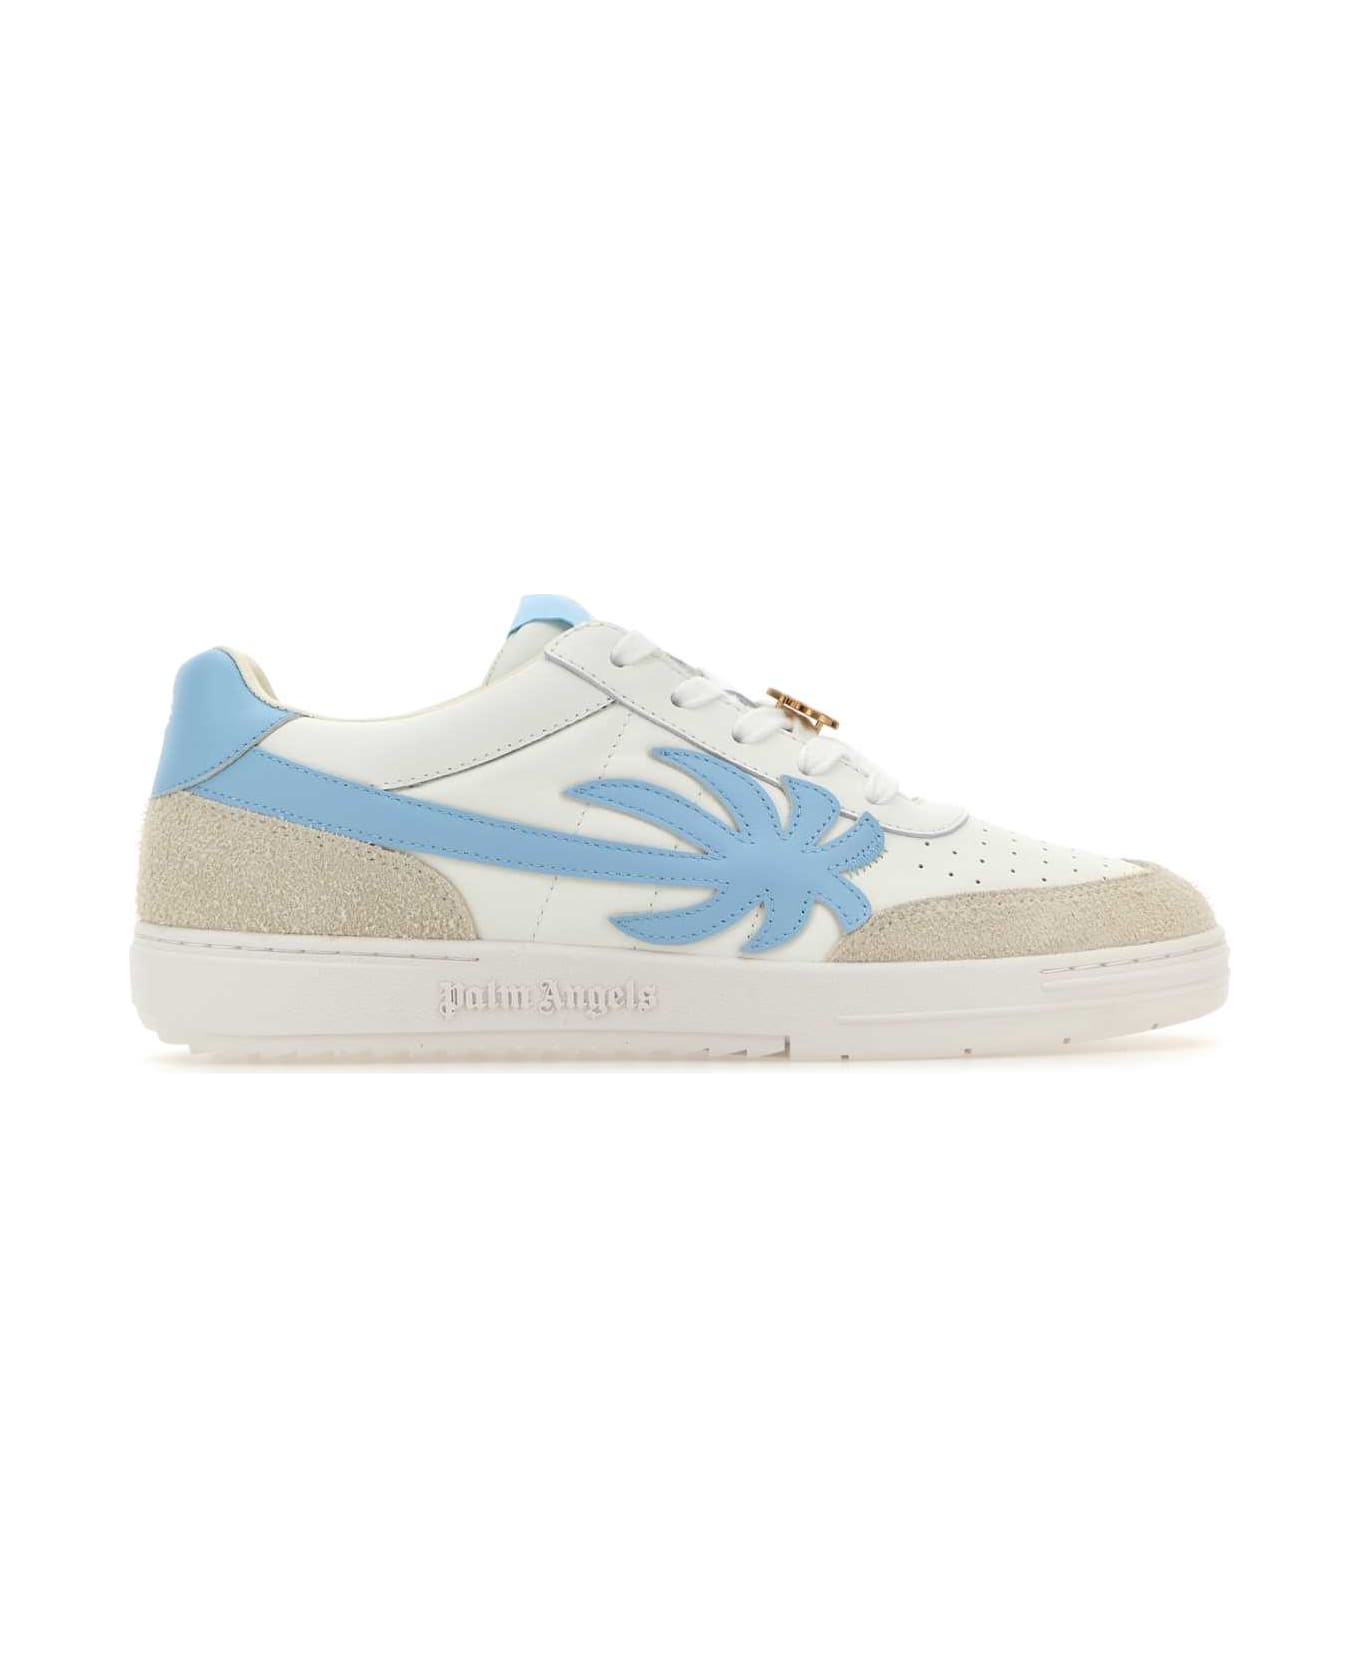 Palm Angels Multicolor Leather Palm Beach University Sneakers - WHITELIGH